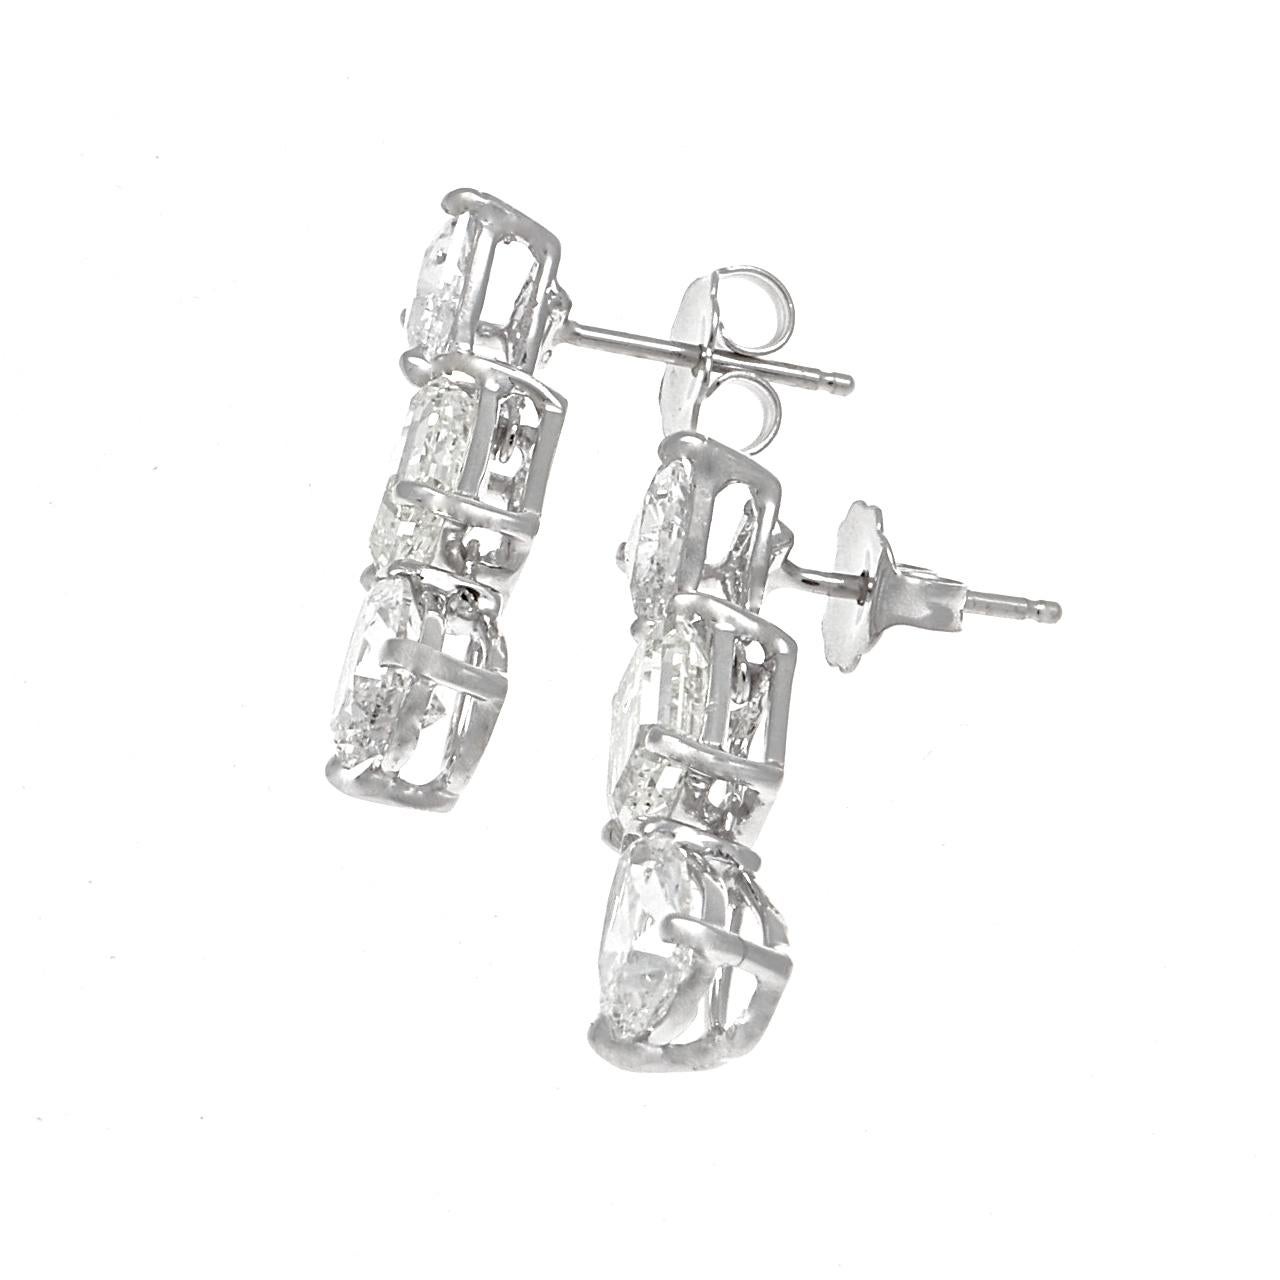 A configuration of abstract shapes aligning into stylish fashion. Featuring approximately two 0.50 carat trillion cut diamonds suspending two GIA certified 1.01 carat emerald cut diamonds dangling two GIA certified pear shaped diamonds weighing 0.76